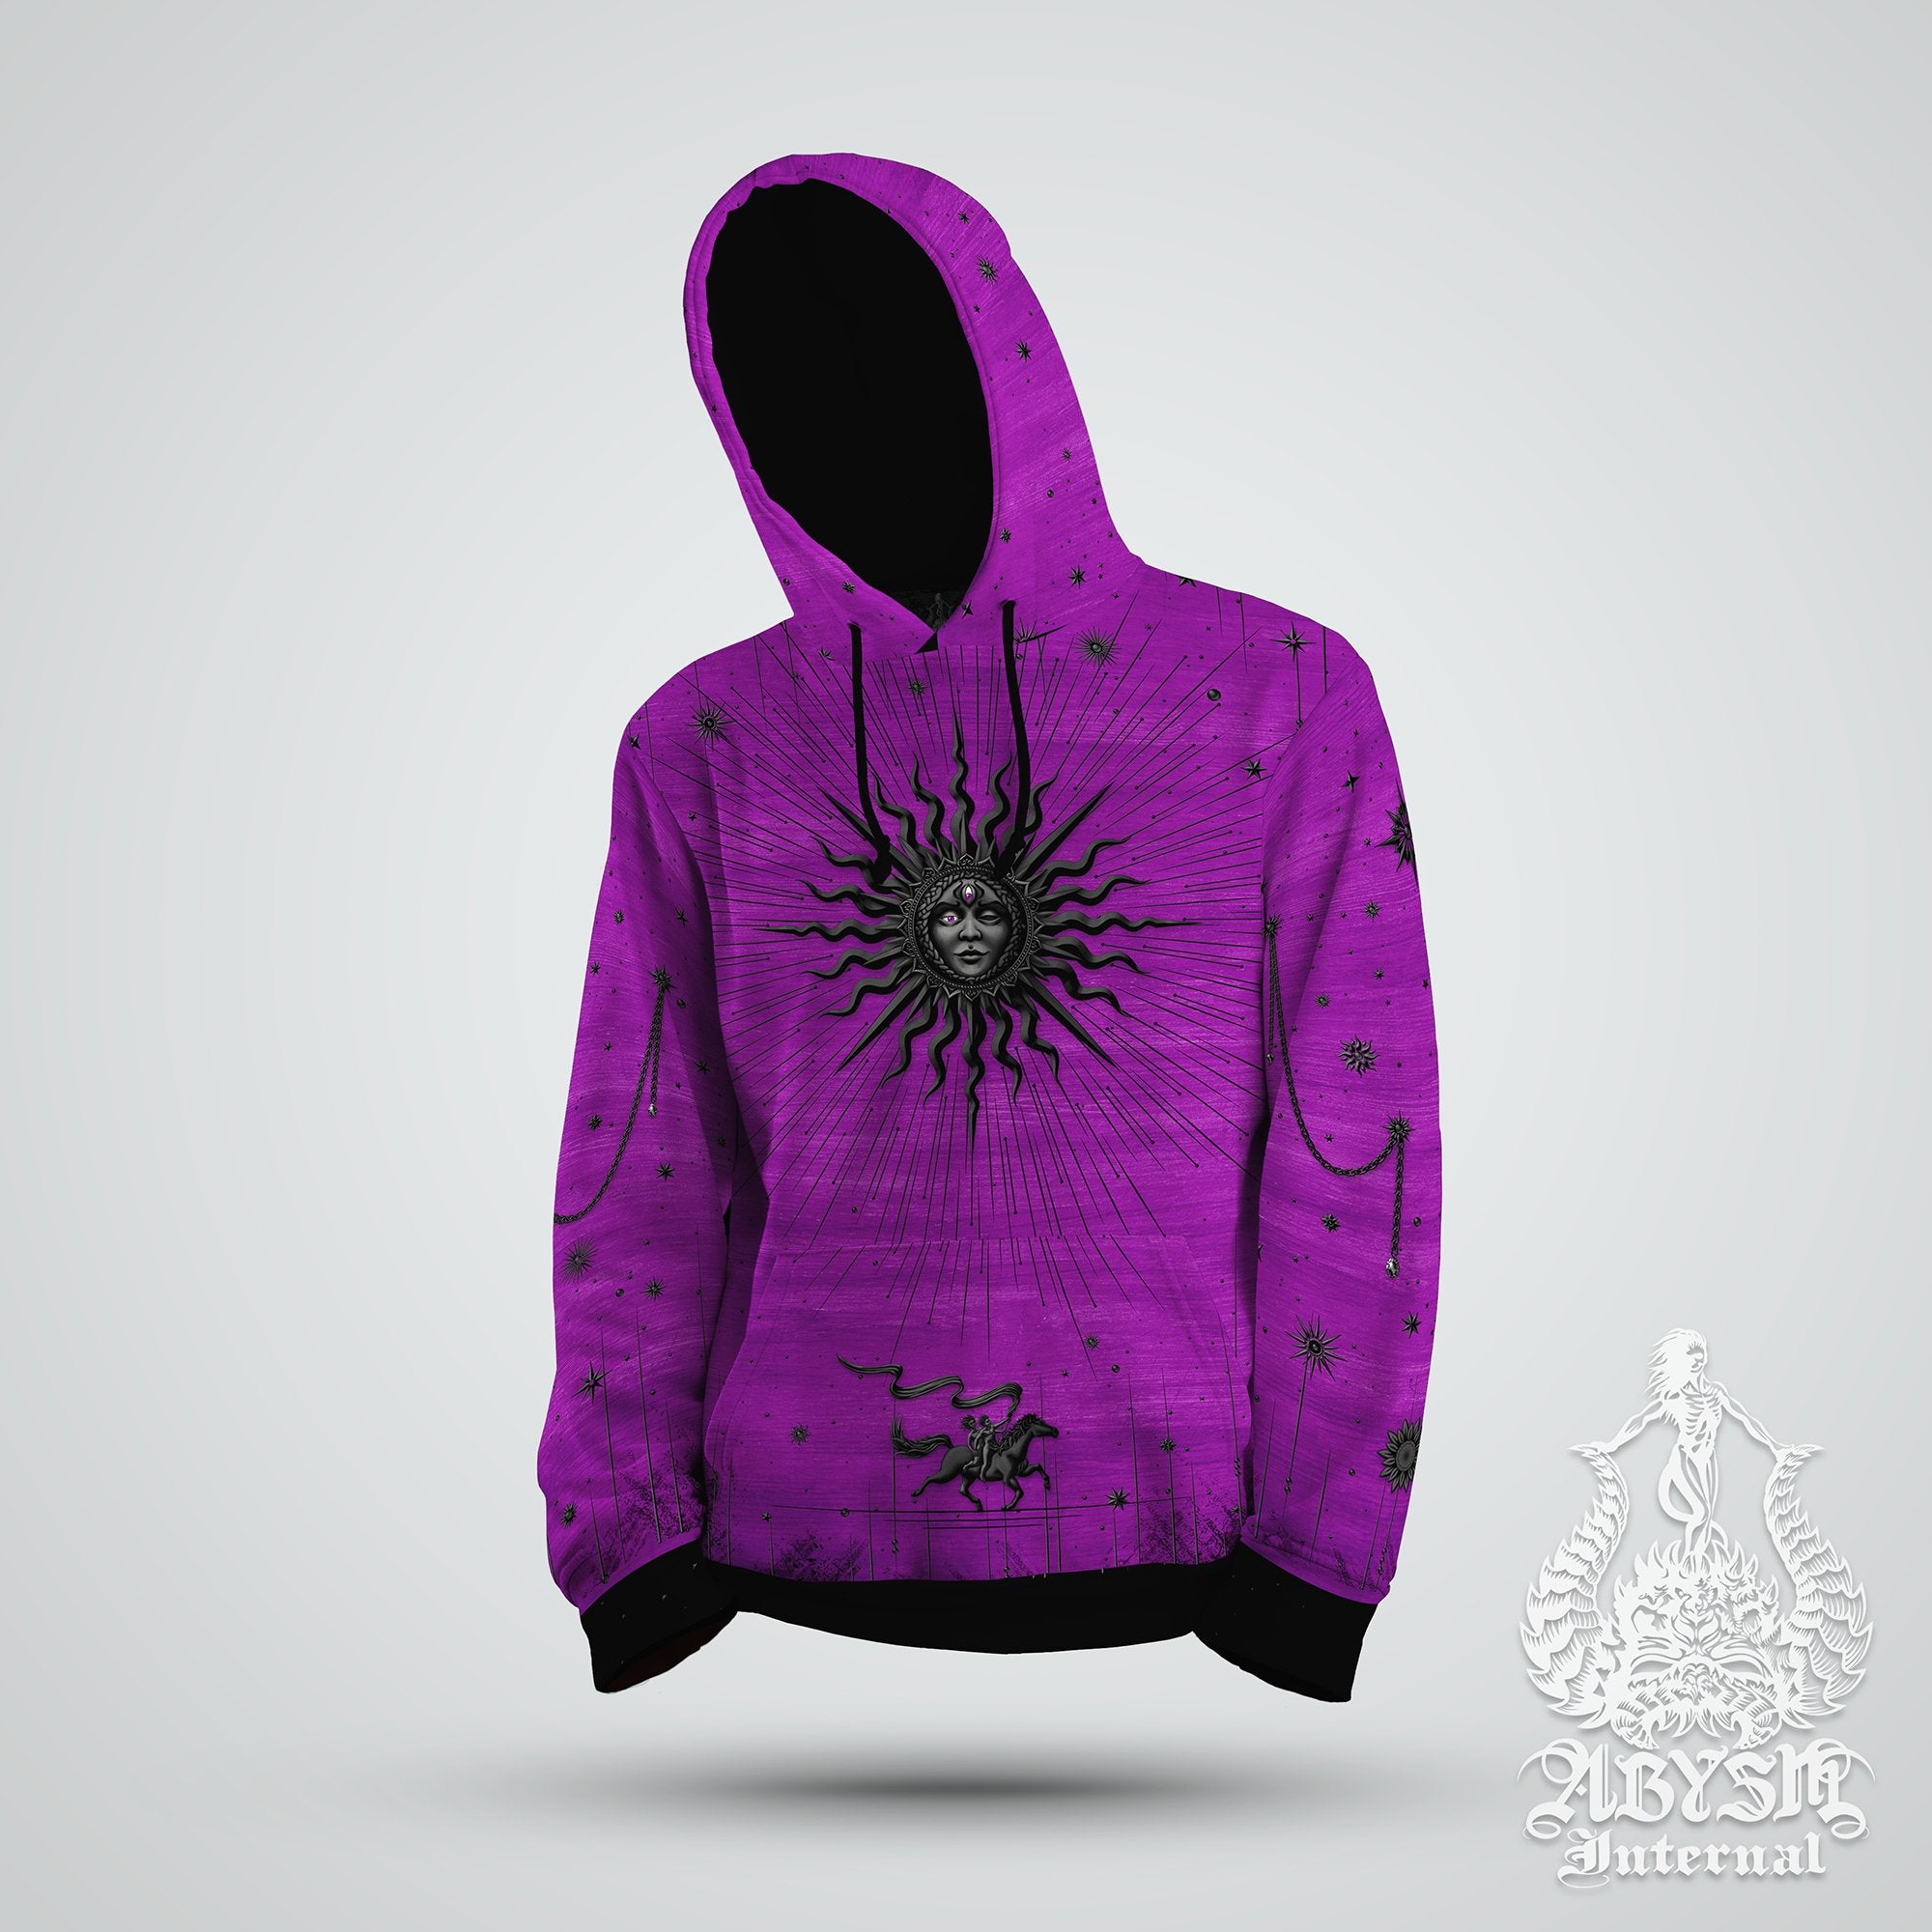 Witch Hoodie, Sun Tarot Arcana Sweater, Pastel Goth Pullover, Witchy Party Outfit, Magic and Esoteric Festival, Purple and Black Clothing, Unisex - Abysm Internal